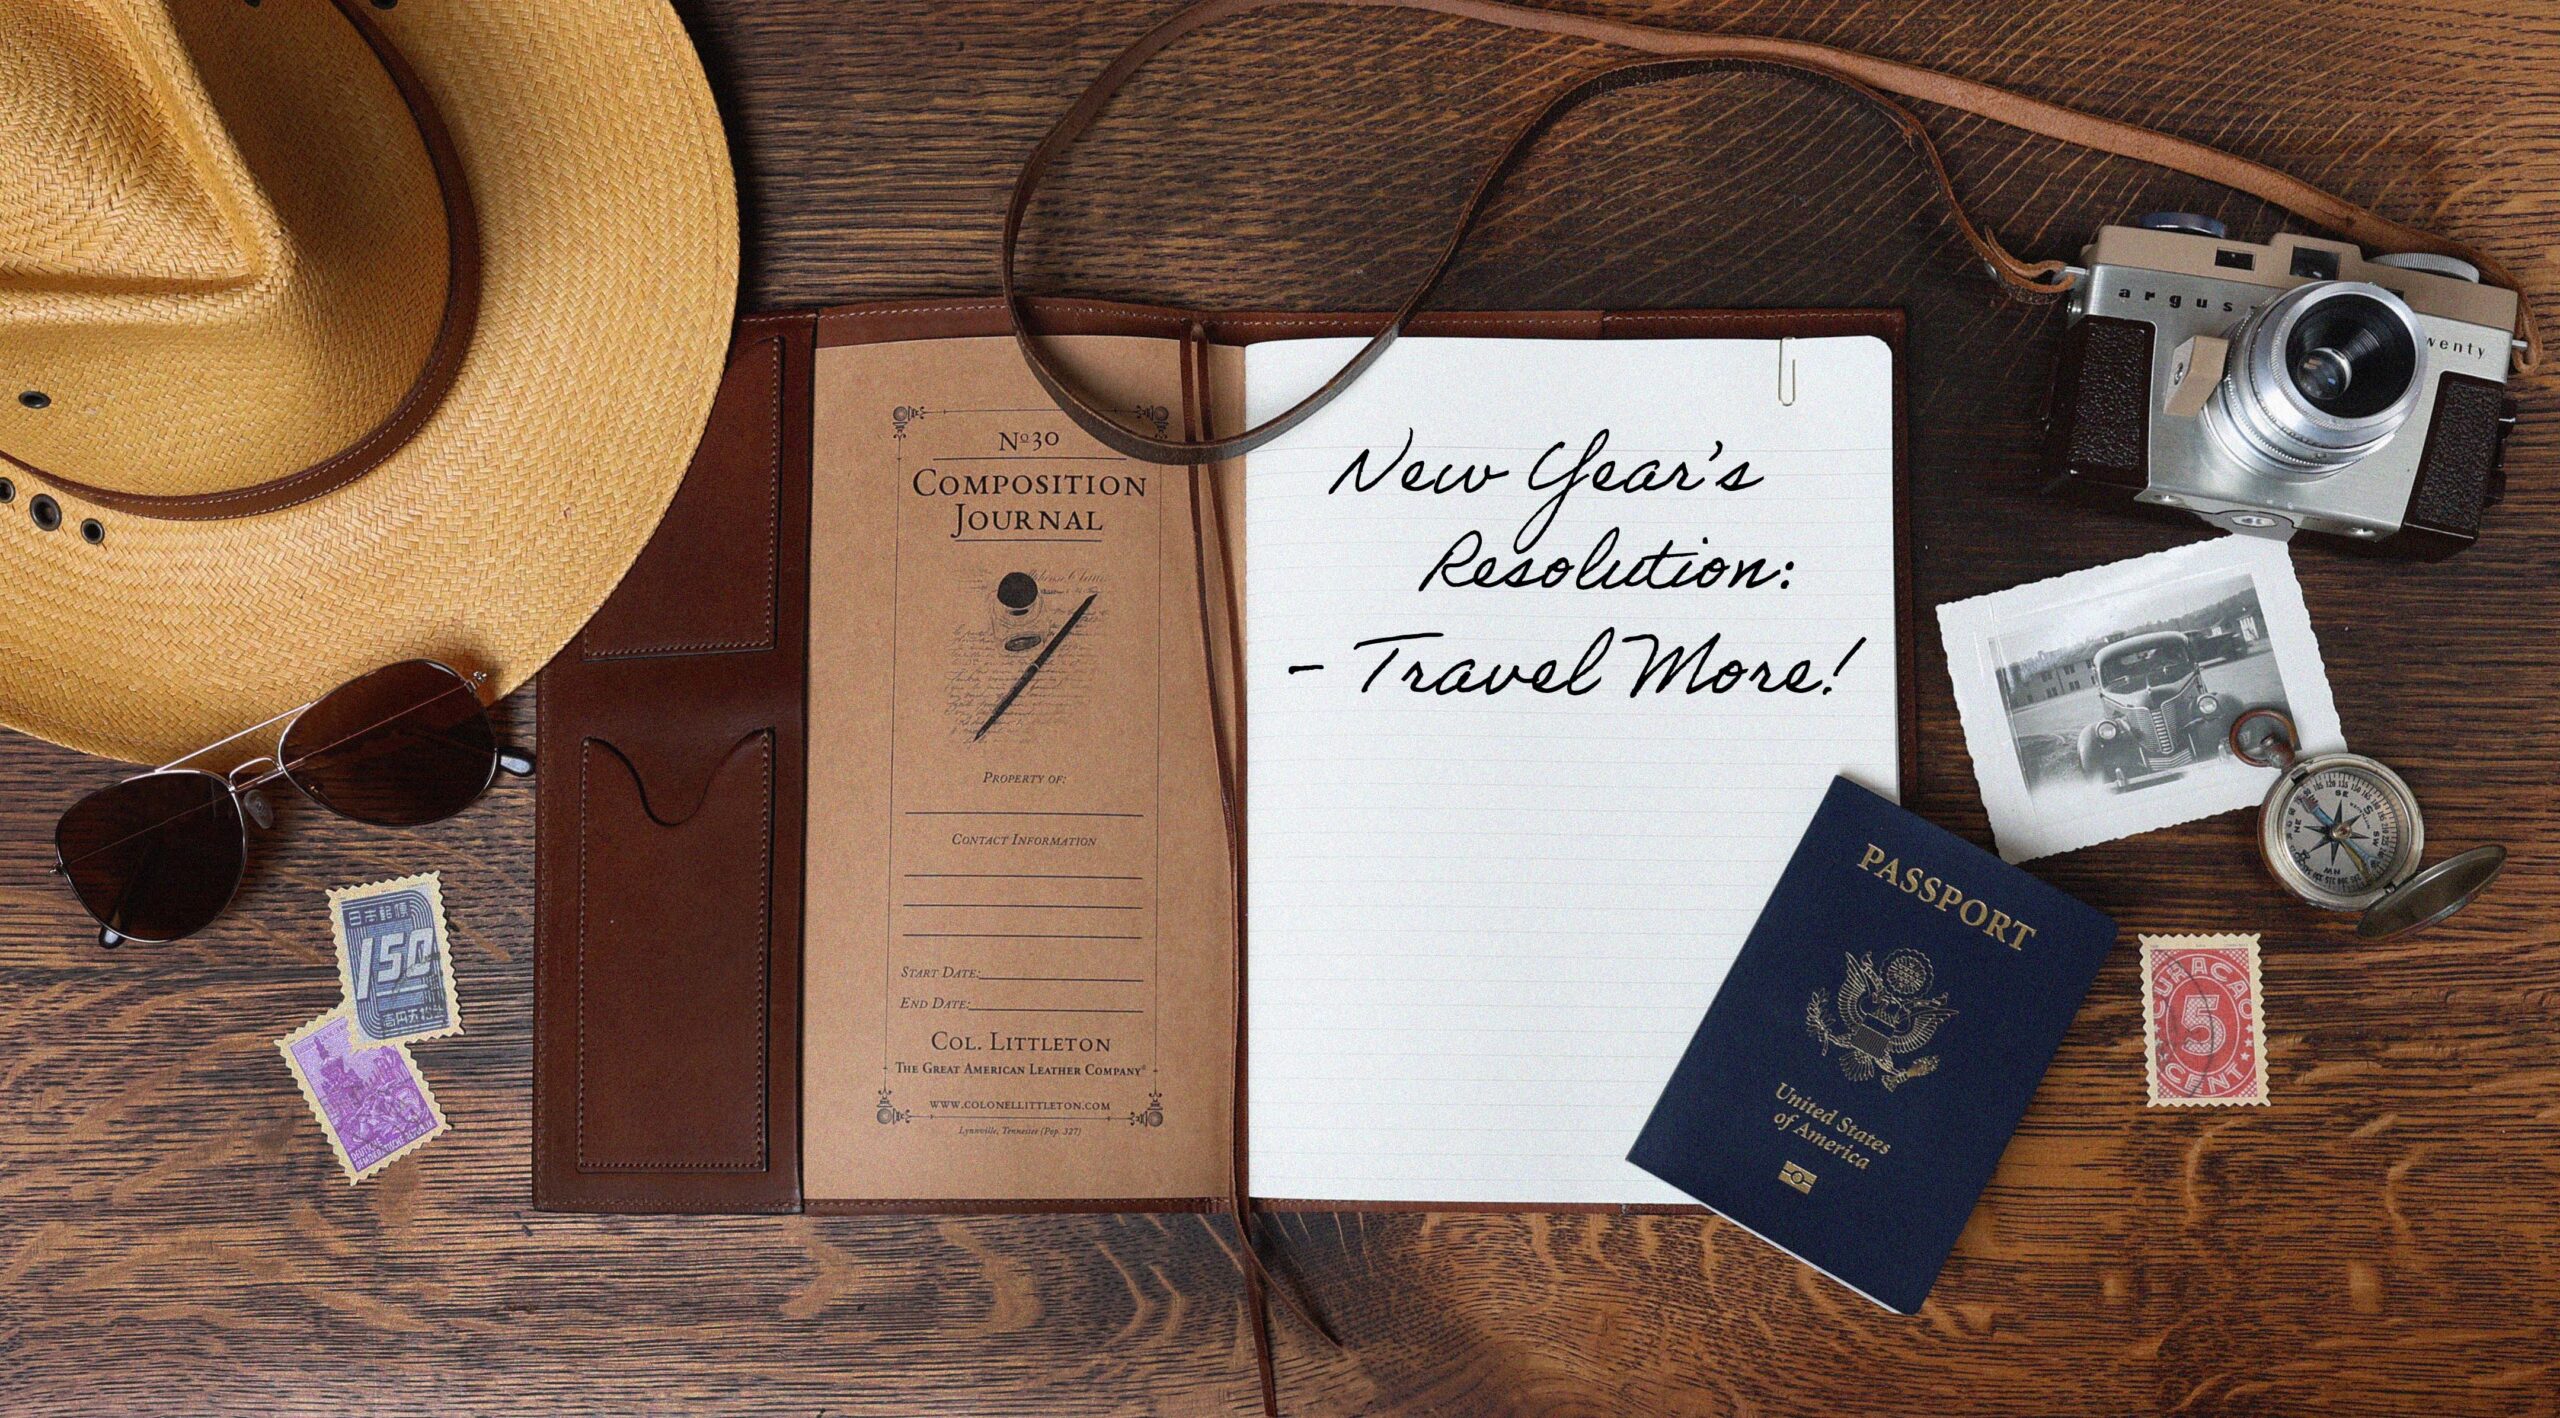 New Year's Resolution: Travel More